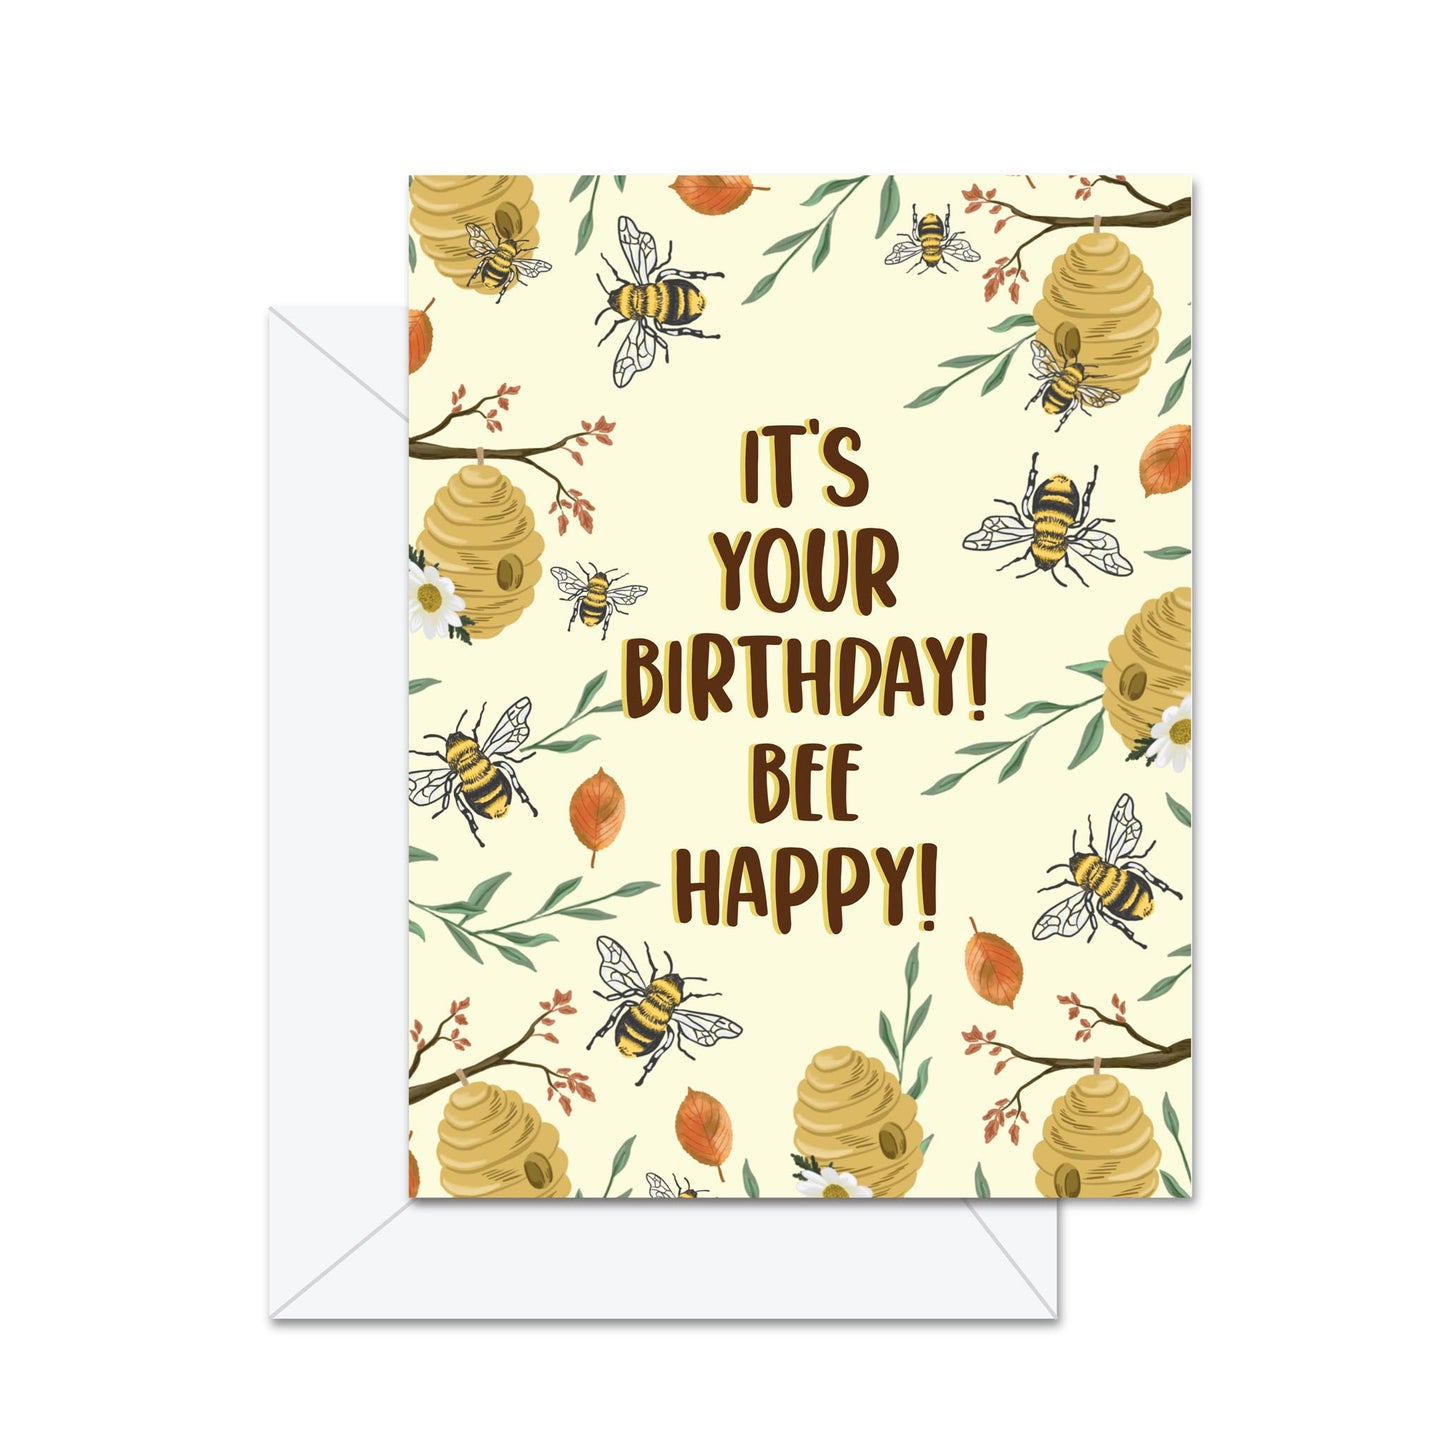 It's Your Birthday! Bee Happy! - Greeting Card